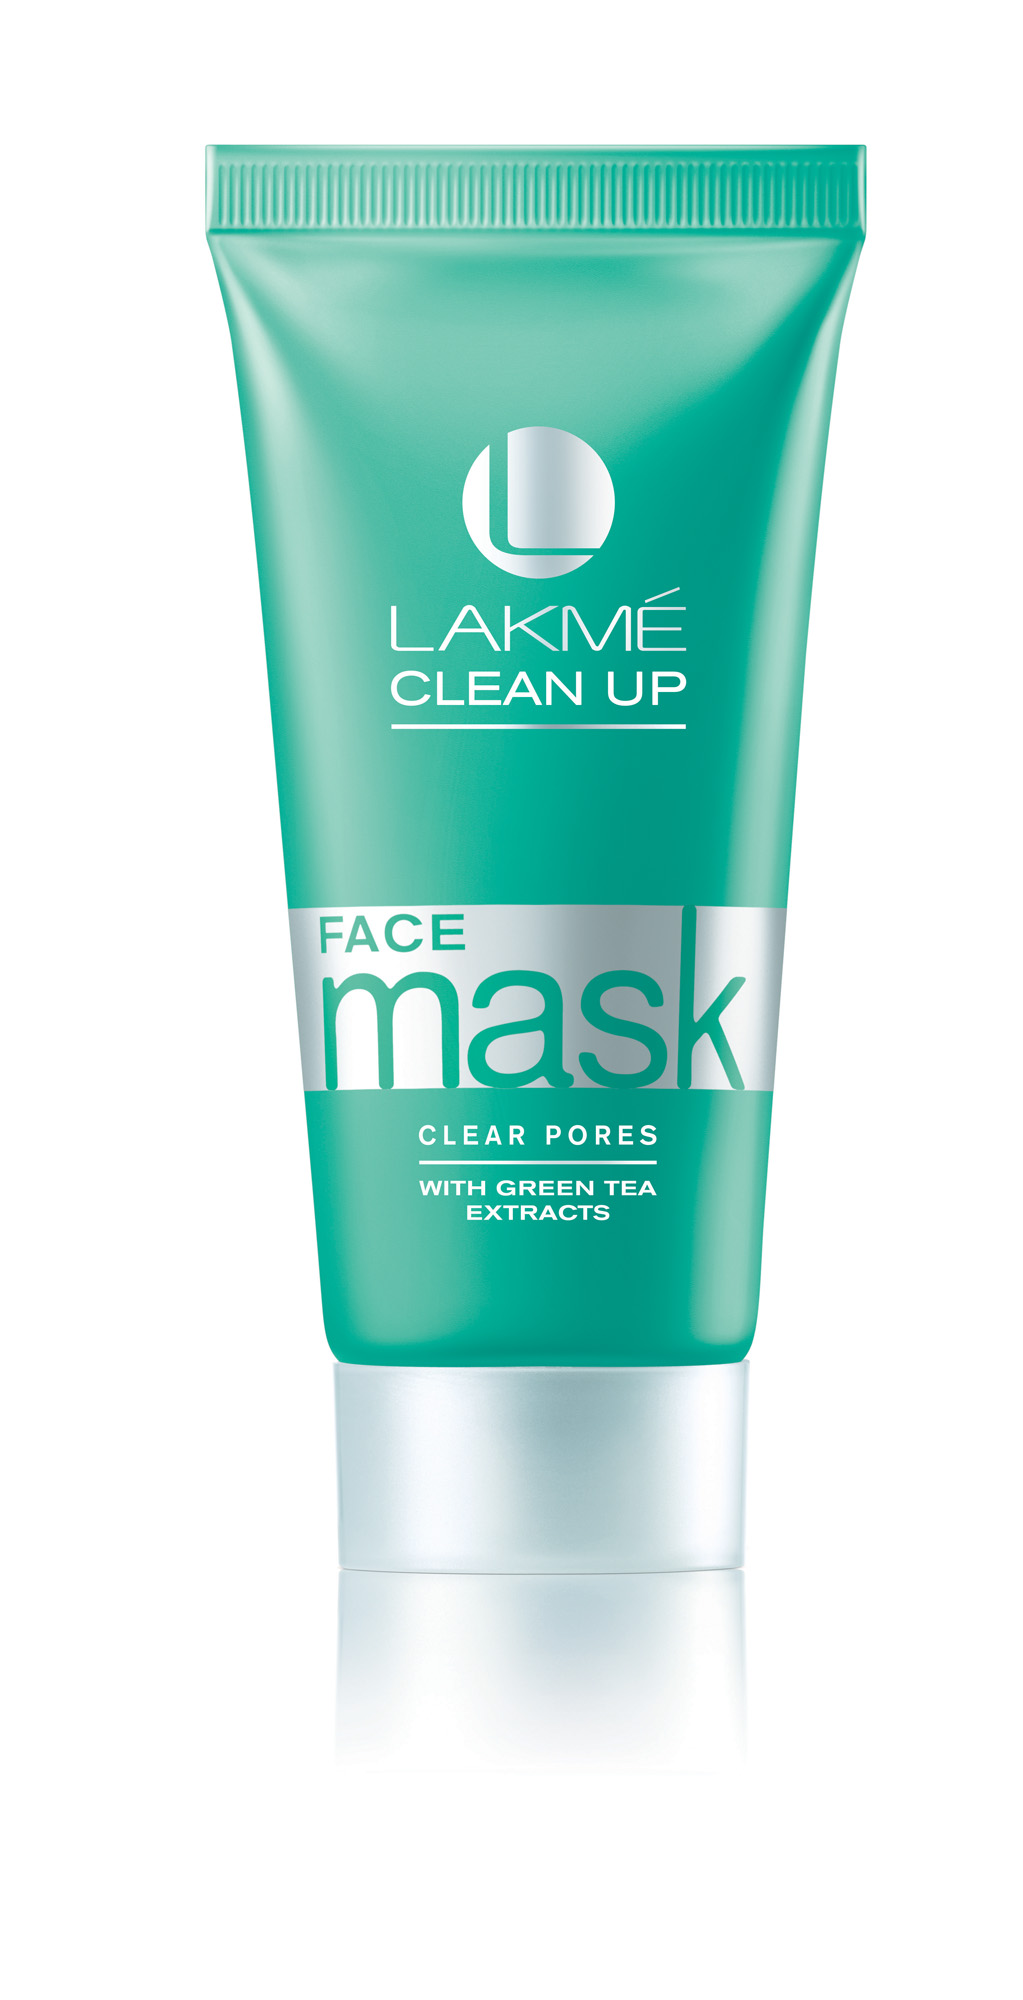 clear Beauty pores  clean mask face Indian  face diy to  Lakme pores up Vanitynoapologies  mask clean